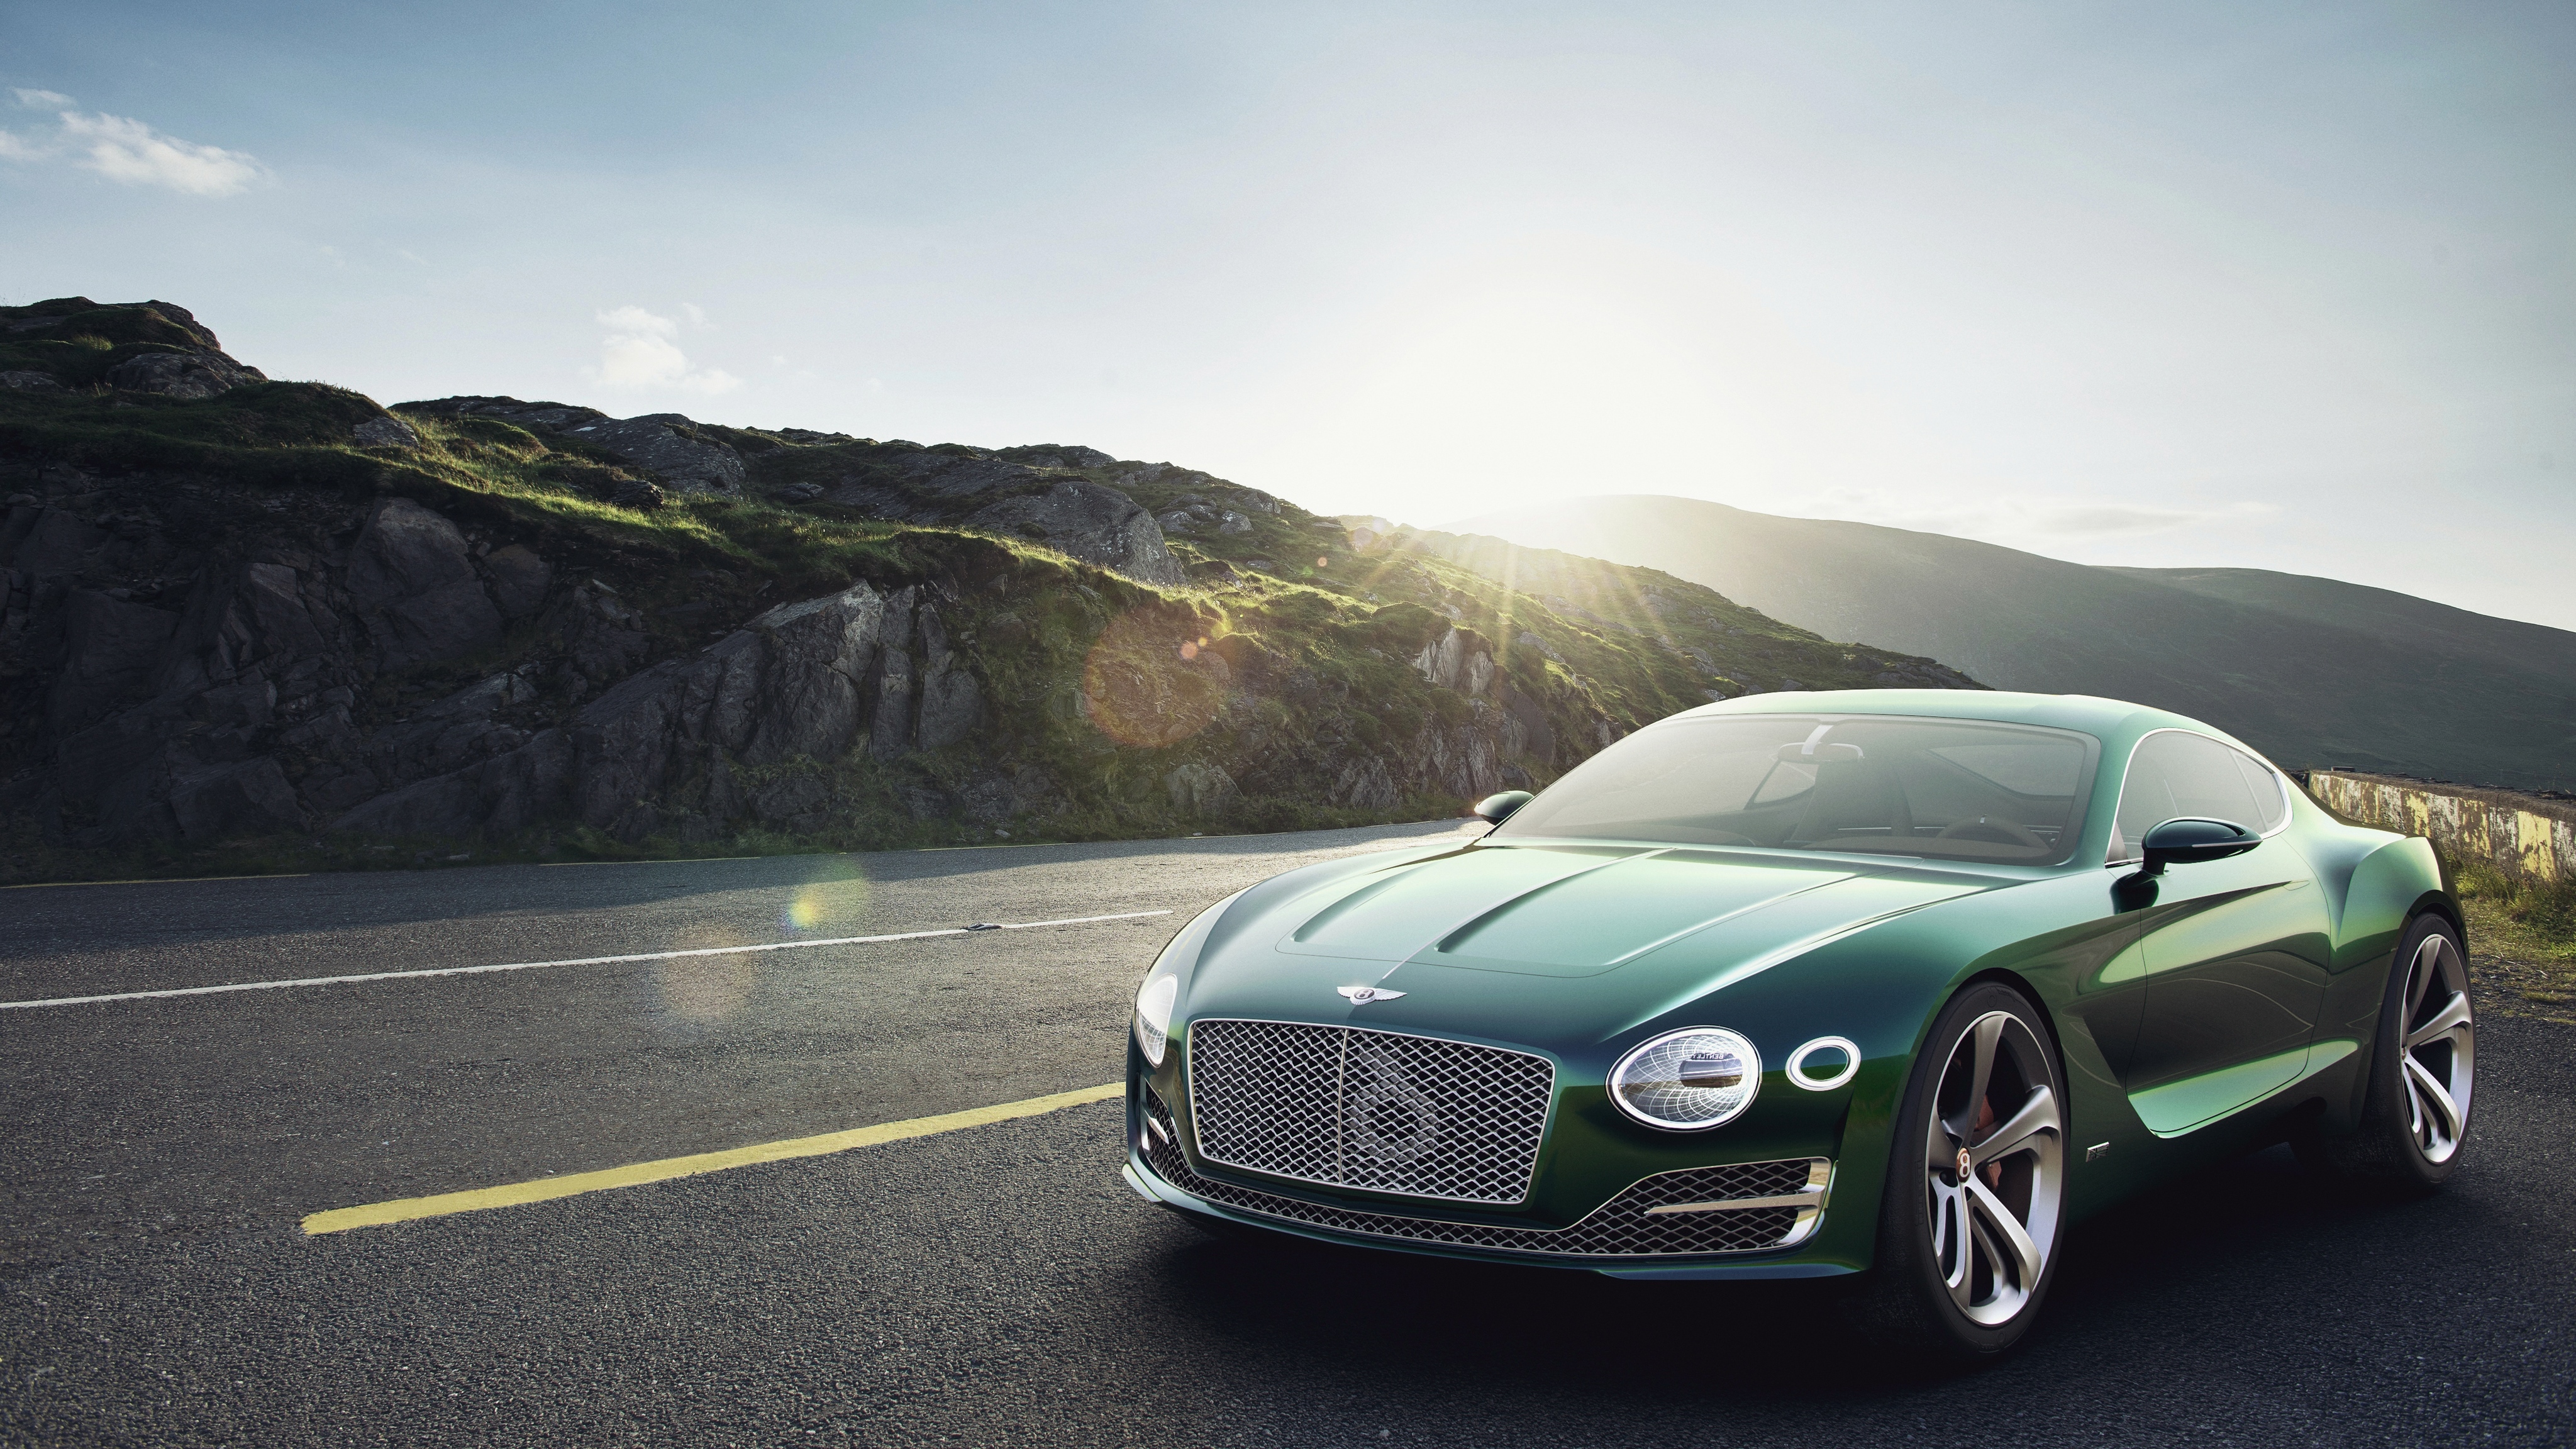 74738 download wallpaper front view, bentley, cars, green, 2015, exp 10 screensavers and pictures for free